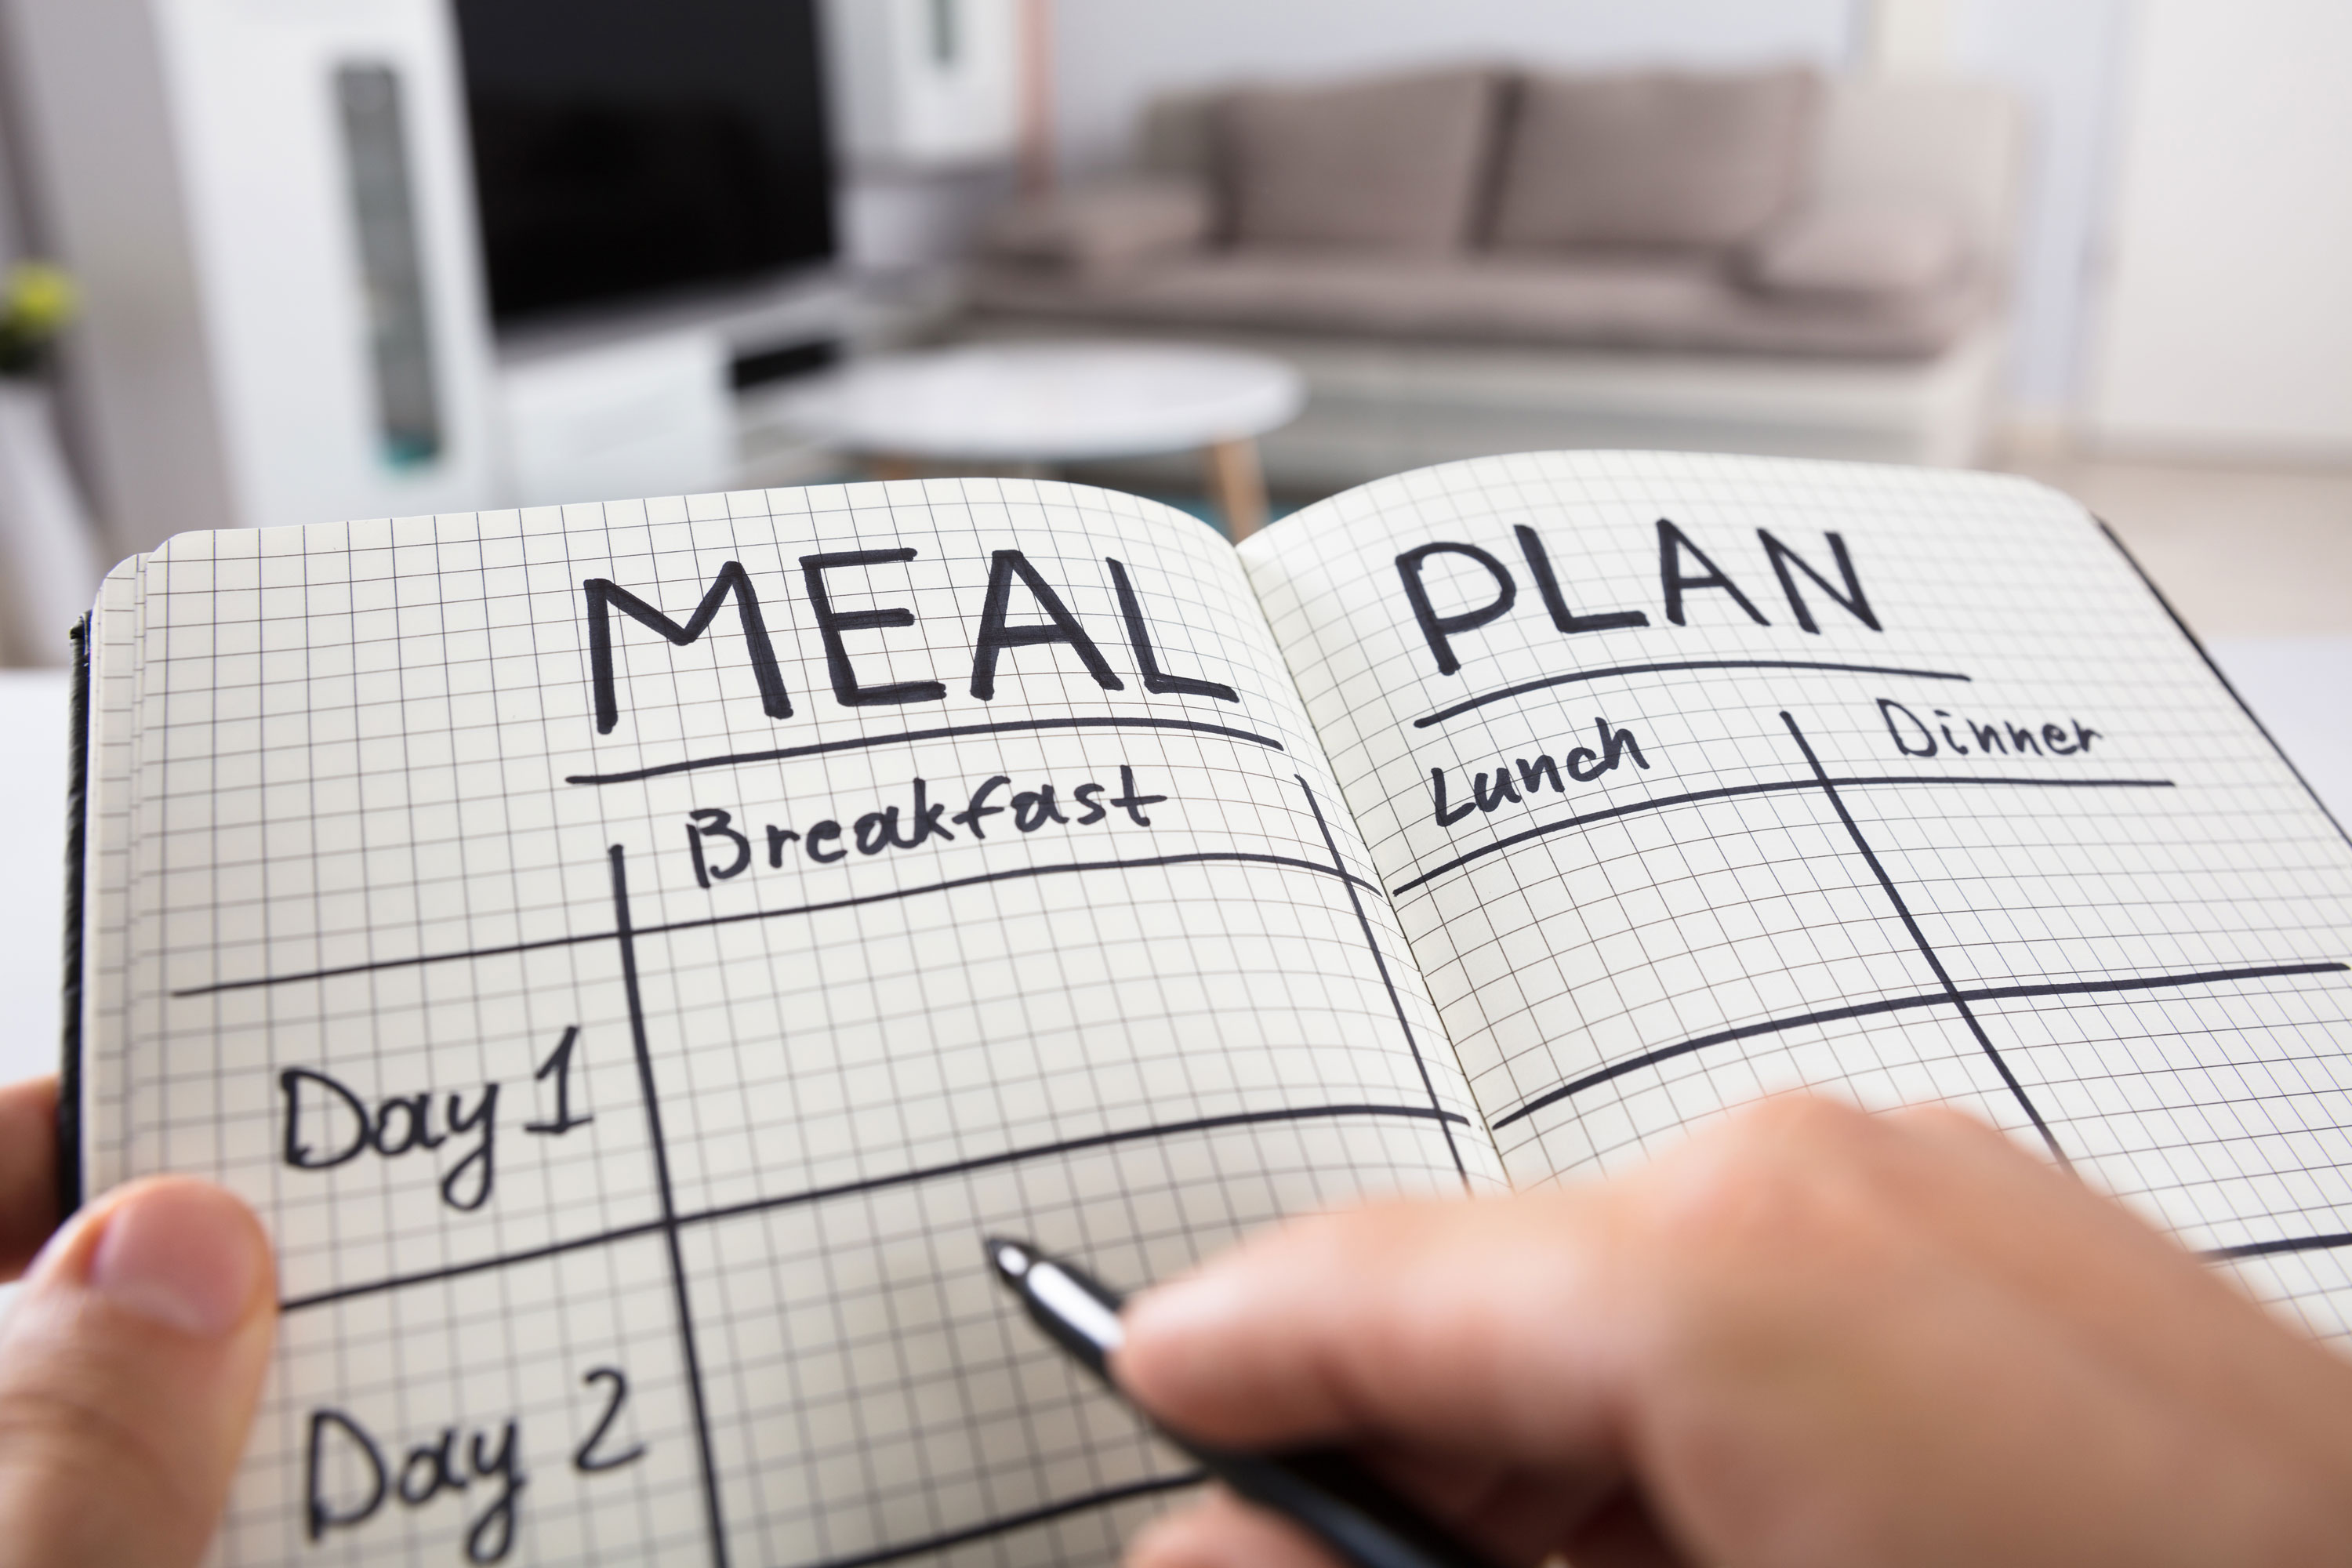 Hands holding a notebook with a meal planning grid drawn out. The grid has sections for breakfast, lunch and dinner across several days.